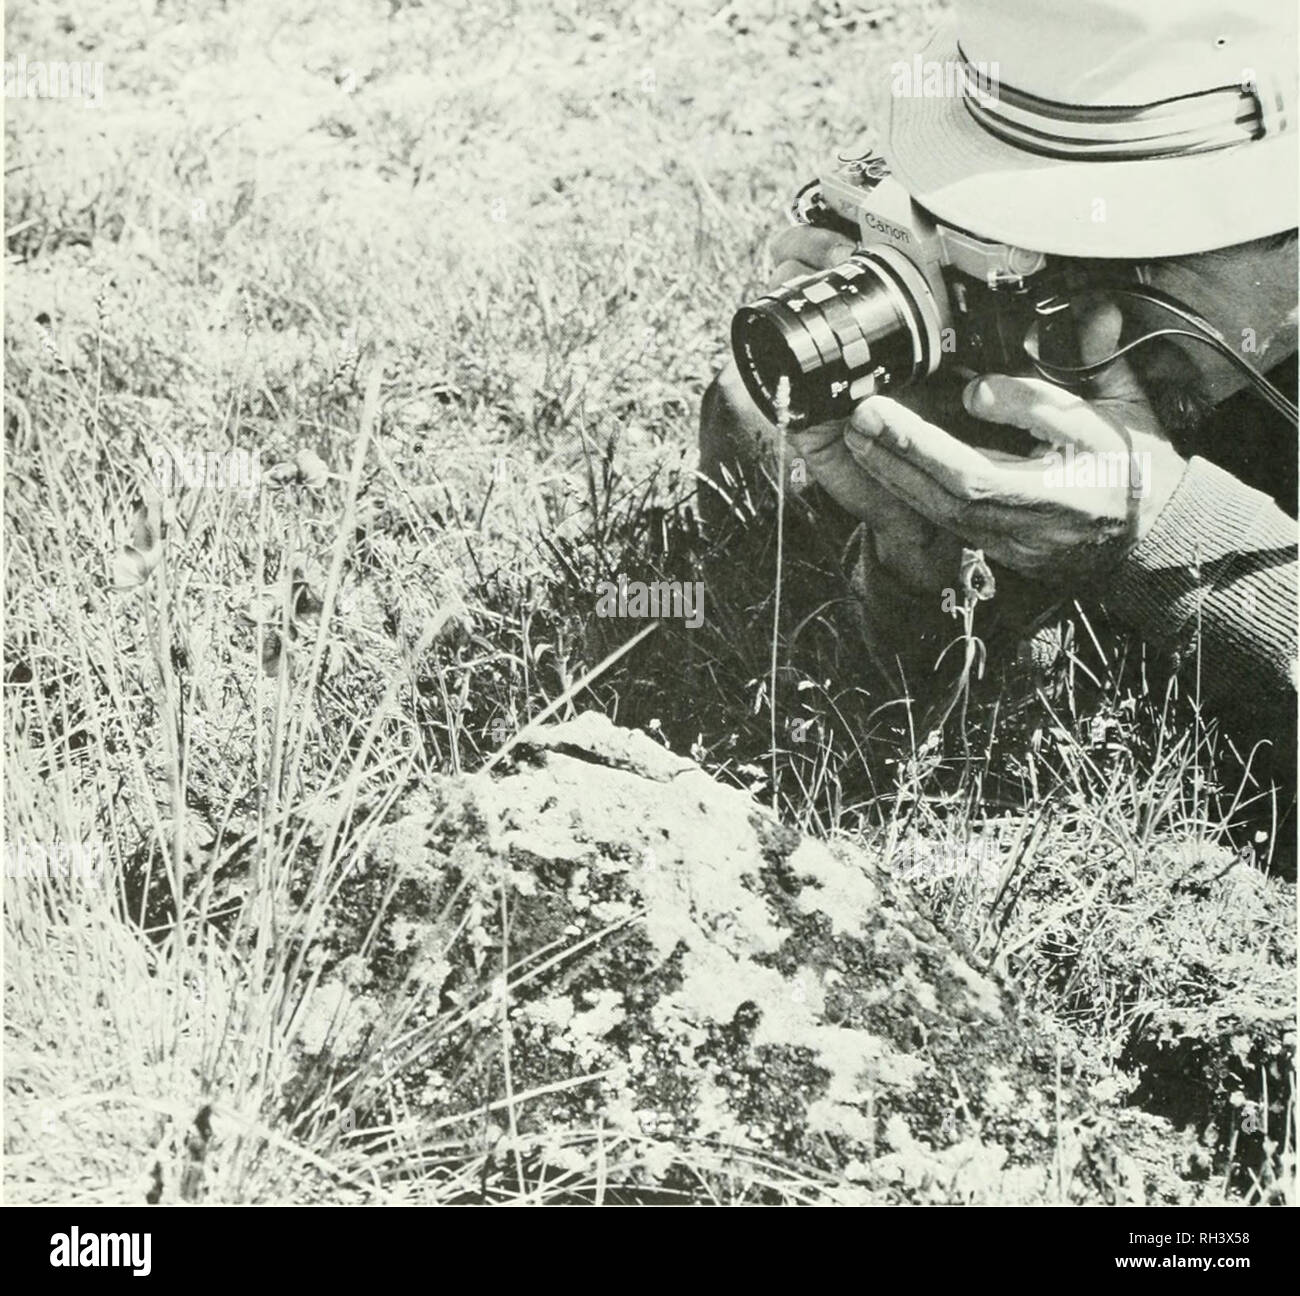 . Brigham Young University science bulletin. Biology -- Periodicals. 26 Bricham Young University Science Bulletin i« %:.^ A  ^^ :»^. Fig. 23. Lehi F. Hintze photographing Monkshood and sedge along the north fhink of tlie northwest spur of Mt. Will, near Locality 8, on siliceous Jurassic volcanic rocks of the Eaglenest volcanic sefiiience at apjiroxi- mately 57°.32' N; 128°47' V, and at an elevation of 6000 feet. Alpine tundra, witli Hicrochloi- alpina, Aconi- tum delphiiiifoliuni, and Carex. 15 June; #36, RC 48b, 19 June. Alpine tundra and talus slopes, on Bowser Fonnation, and alluvium. Er Stock Photo